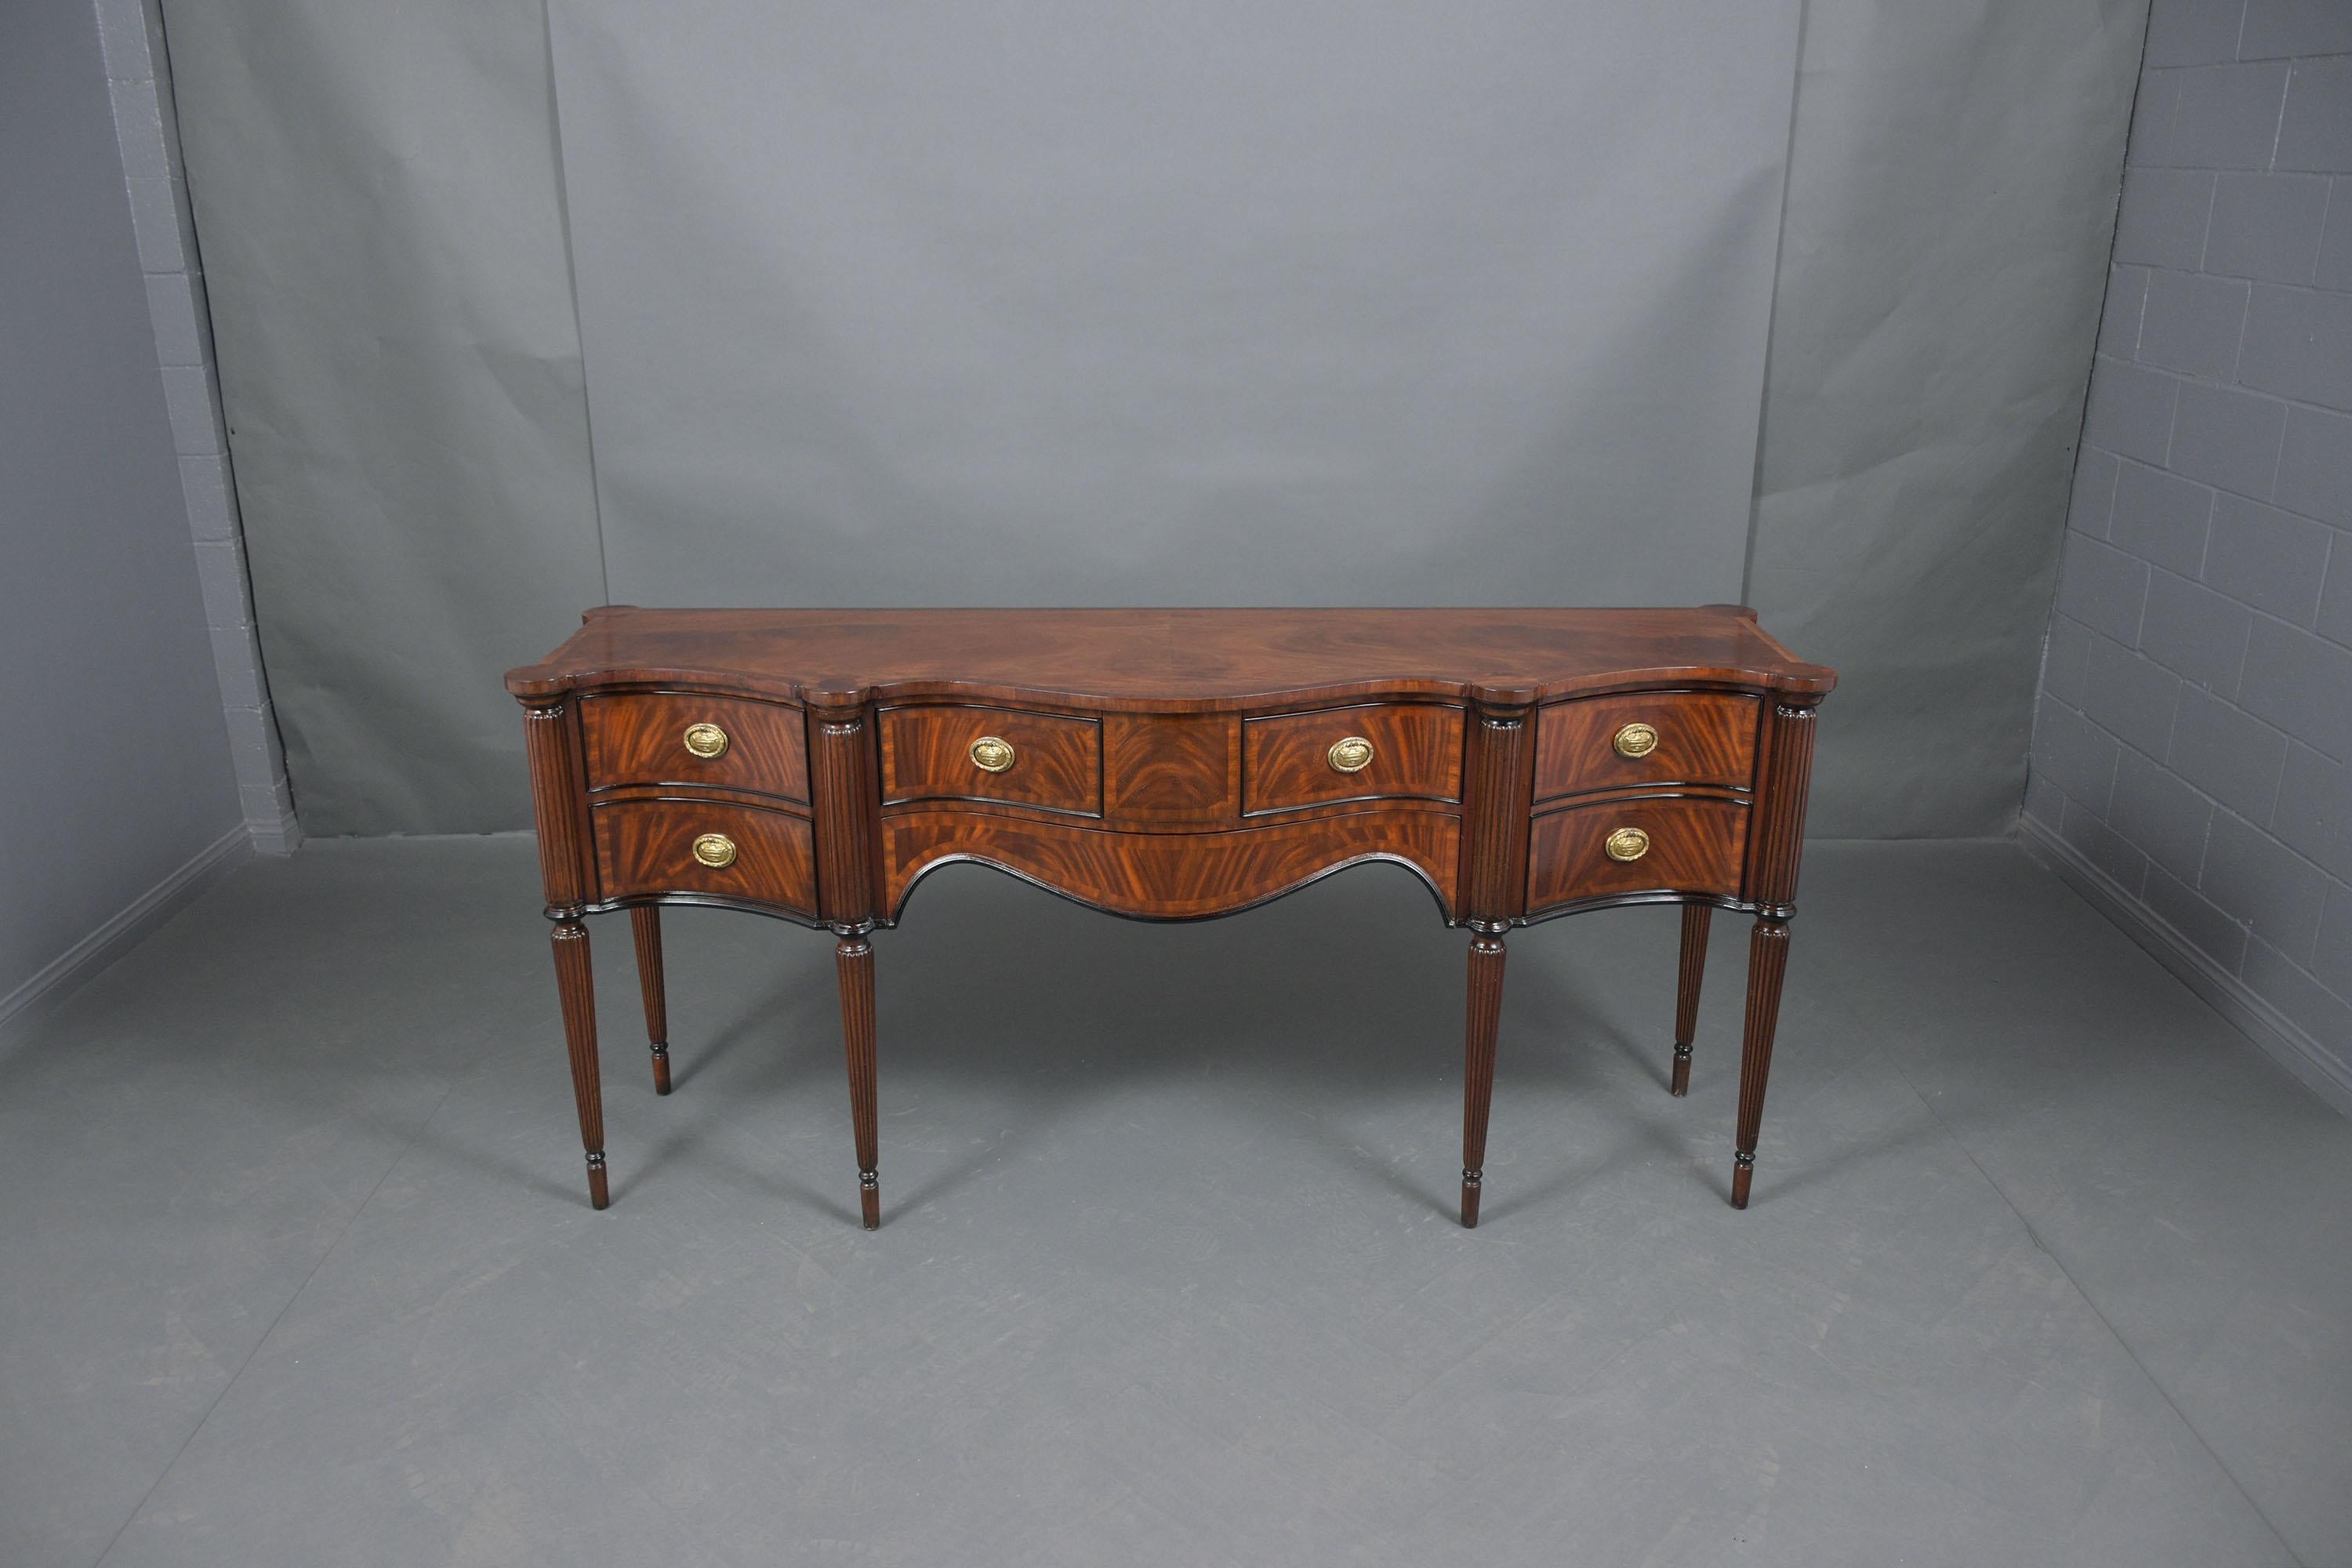 This English George III style server hand-crafted out of flemish mahogany wood features mahogany and ebonized molding color accents with a newly lacquered finish and has been professionally restored by our team of expert craftsmen. The buffet comes